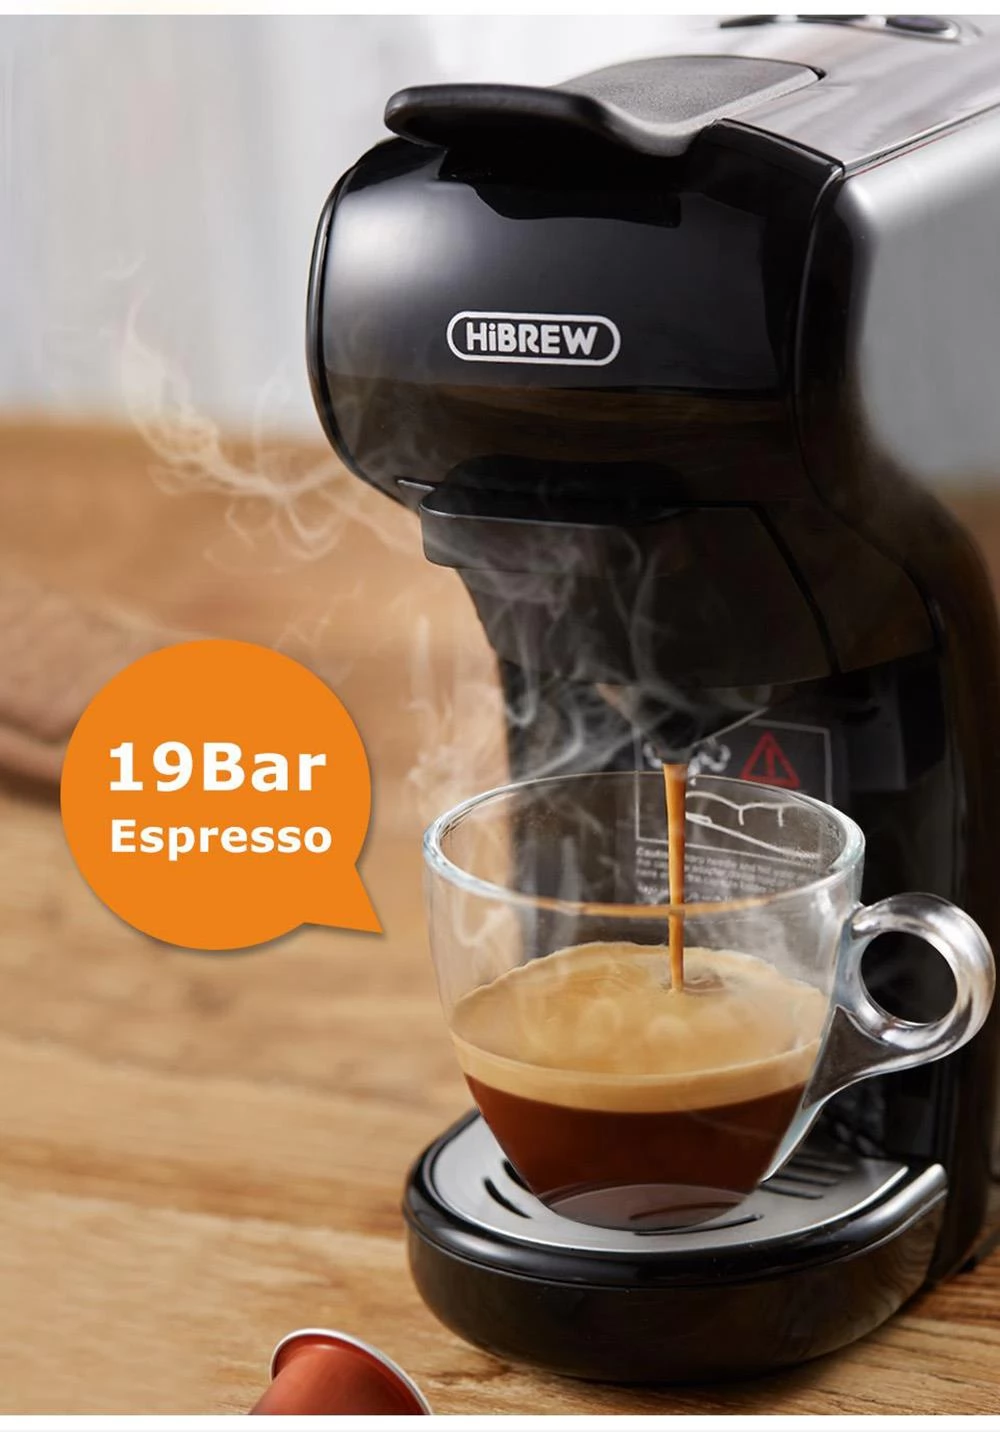 HiBREW H1A 1450W Espresso Coffee Machine, 19 Bar Extraction, Hot/Cold 4-in-1 Multiple Capsule Coffee Maker